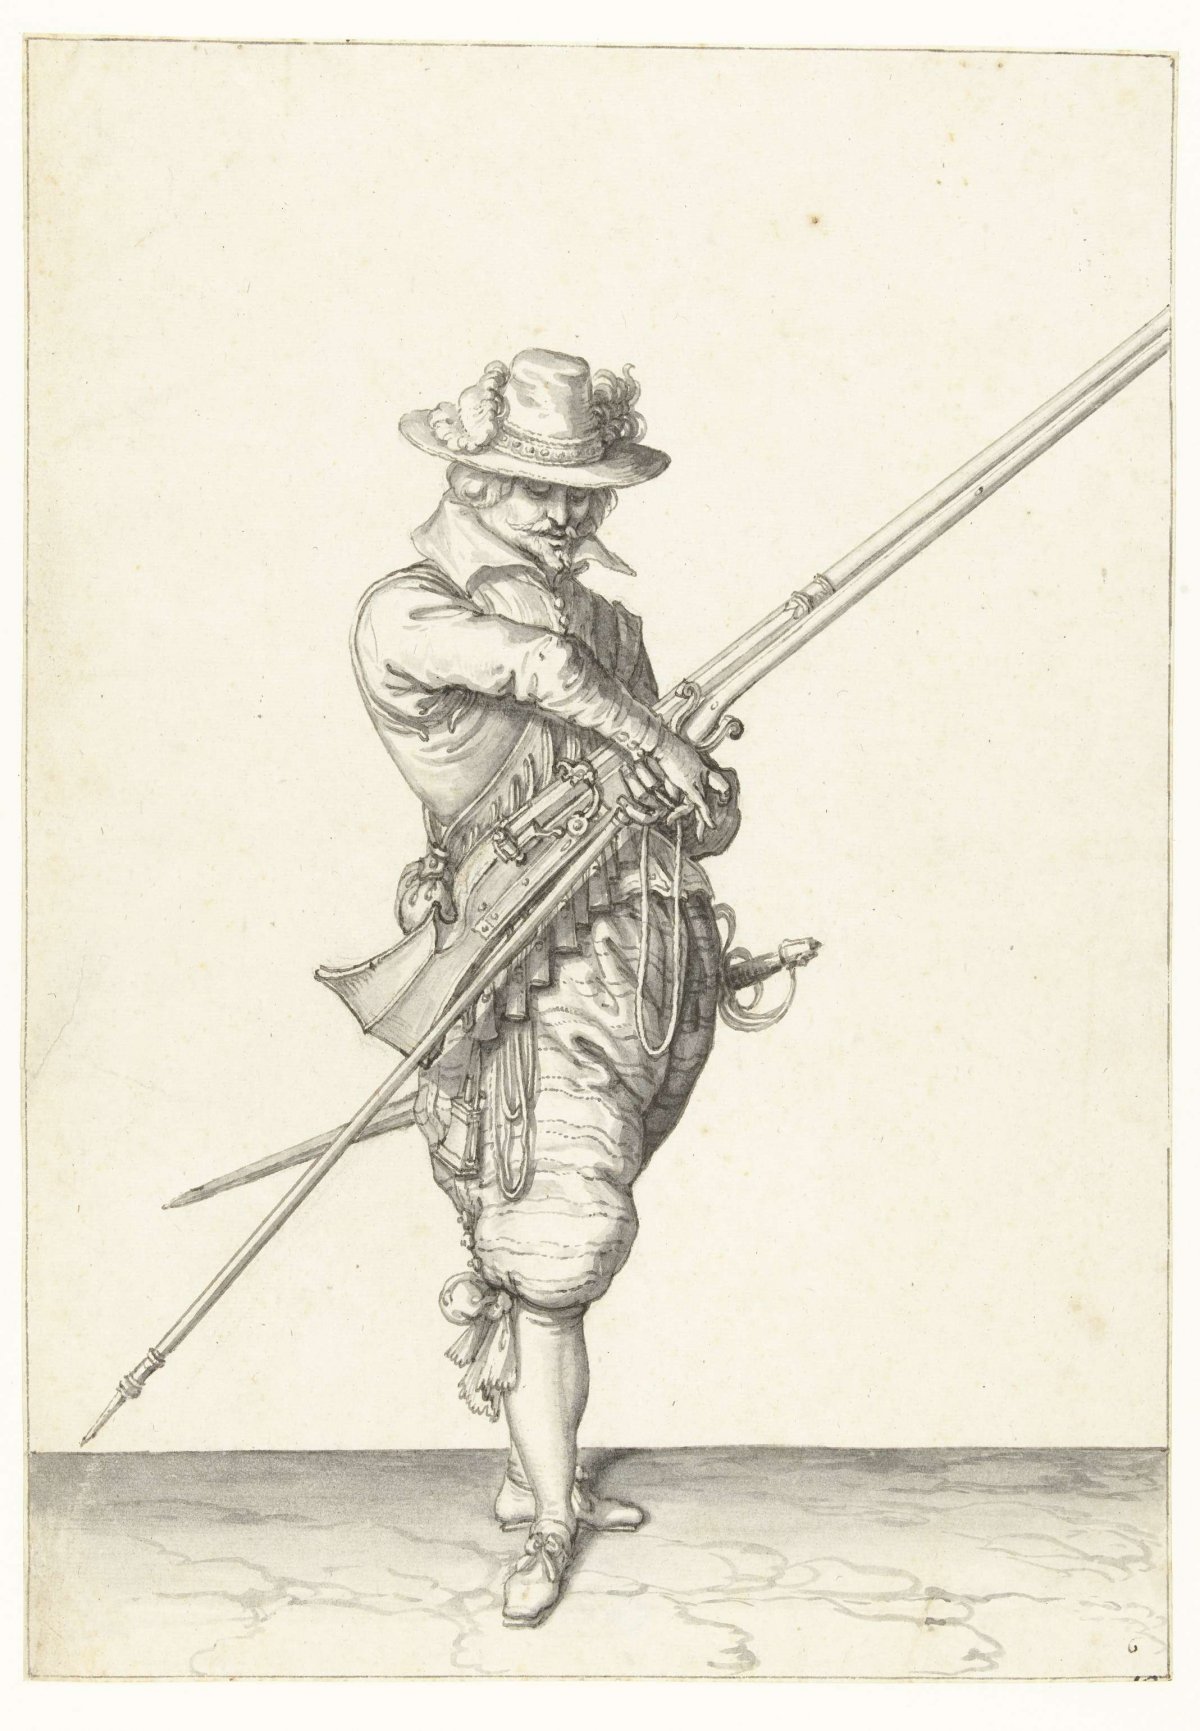 Soldier with a musket grabbing his fuse, Jacques de Gheyn (II), 1596 - 1606